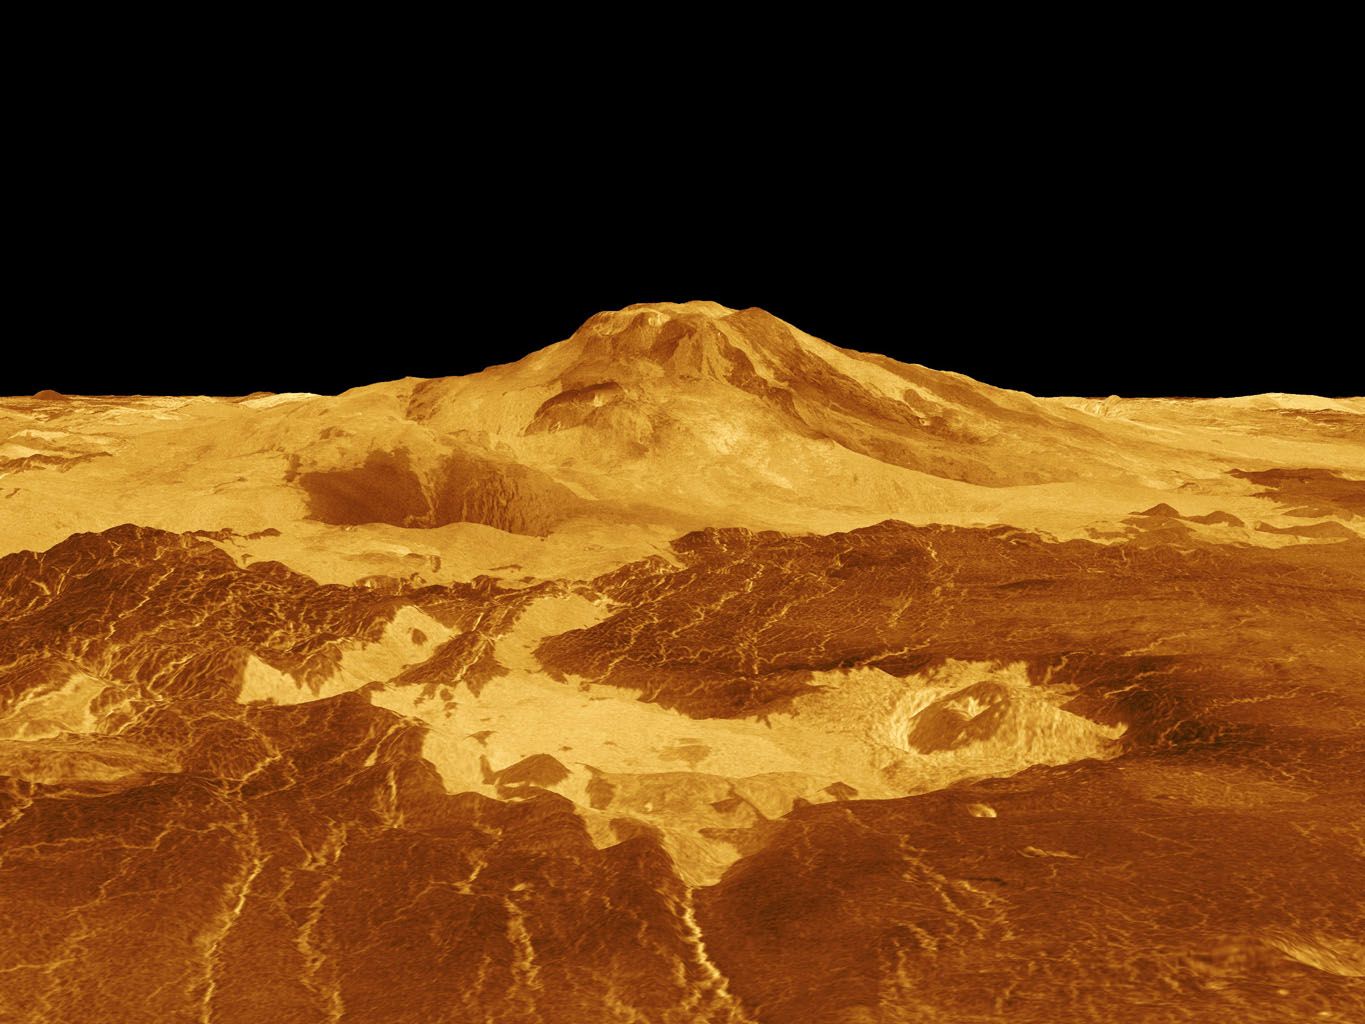 biggest volcano in our solar system